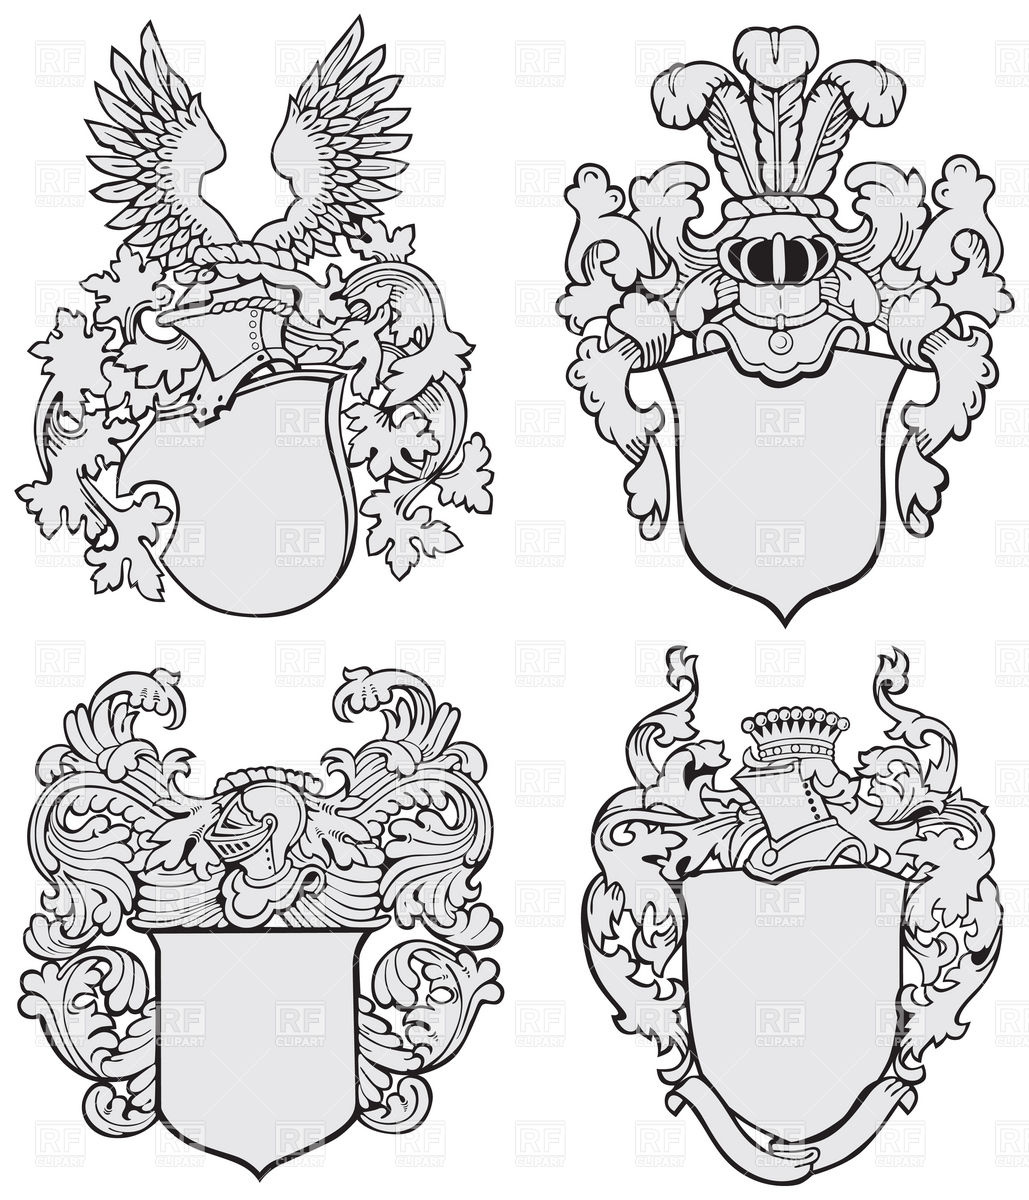 coat-of-arms-template-vector-at-getdrawings-free-download